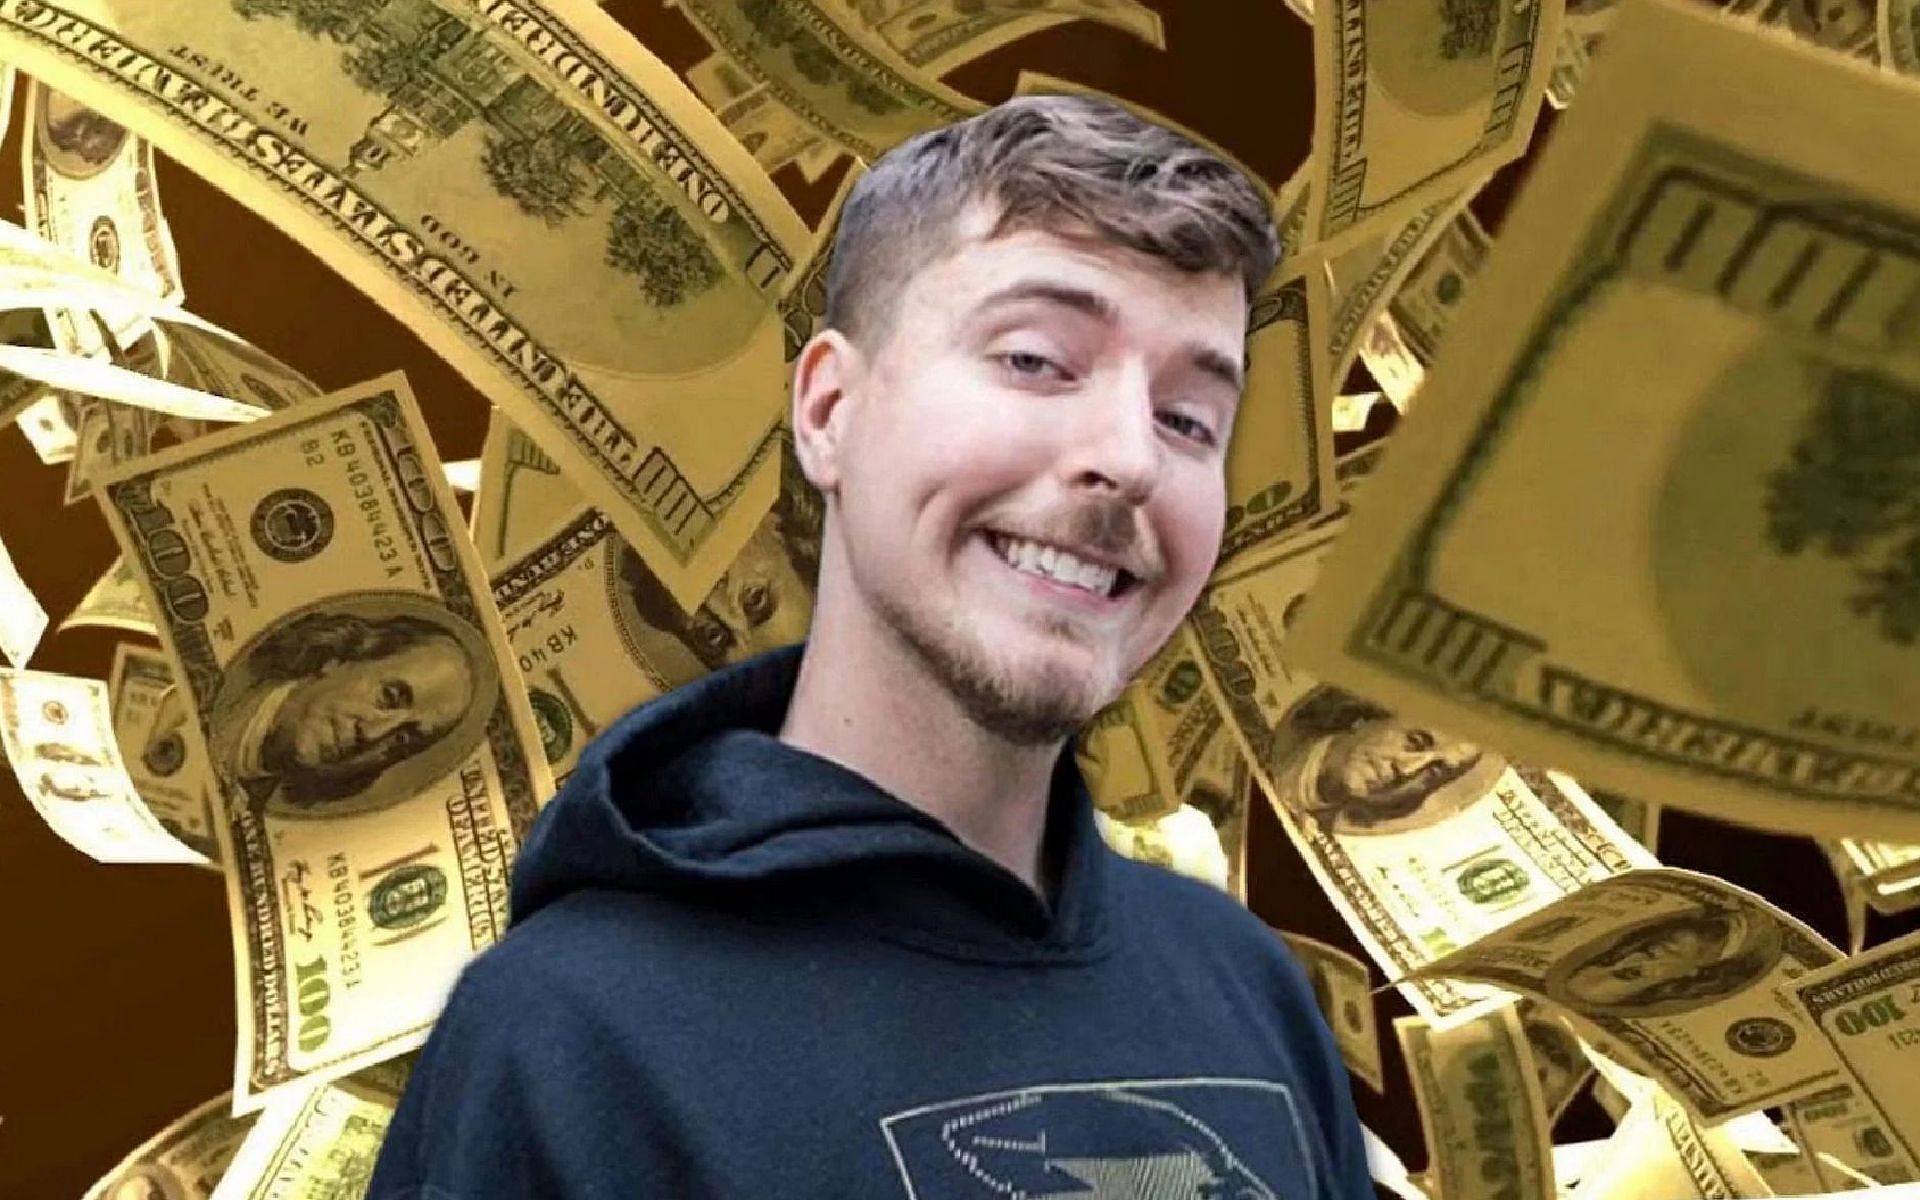 Patrick Bet-David provided an approximate valuation for MrBeast